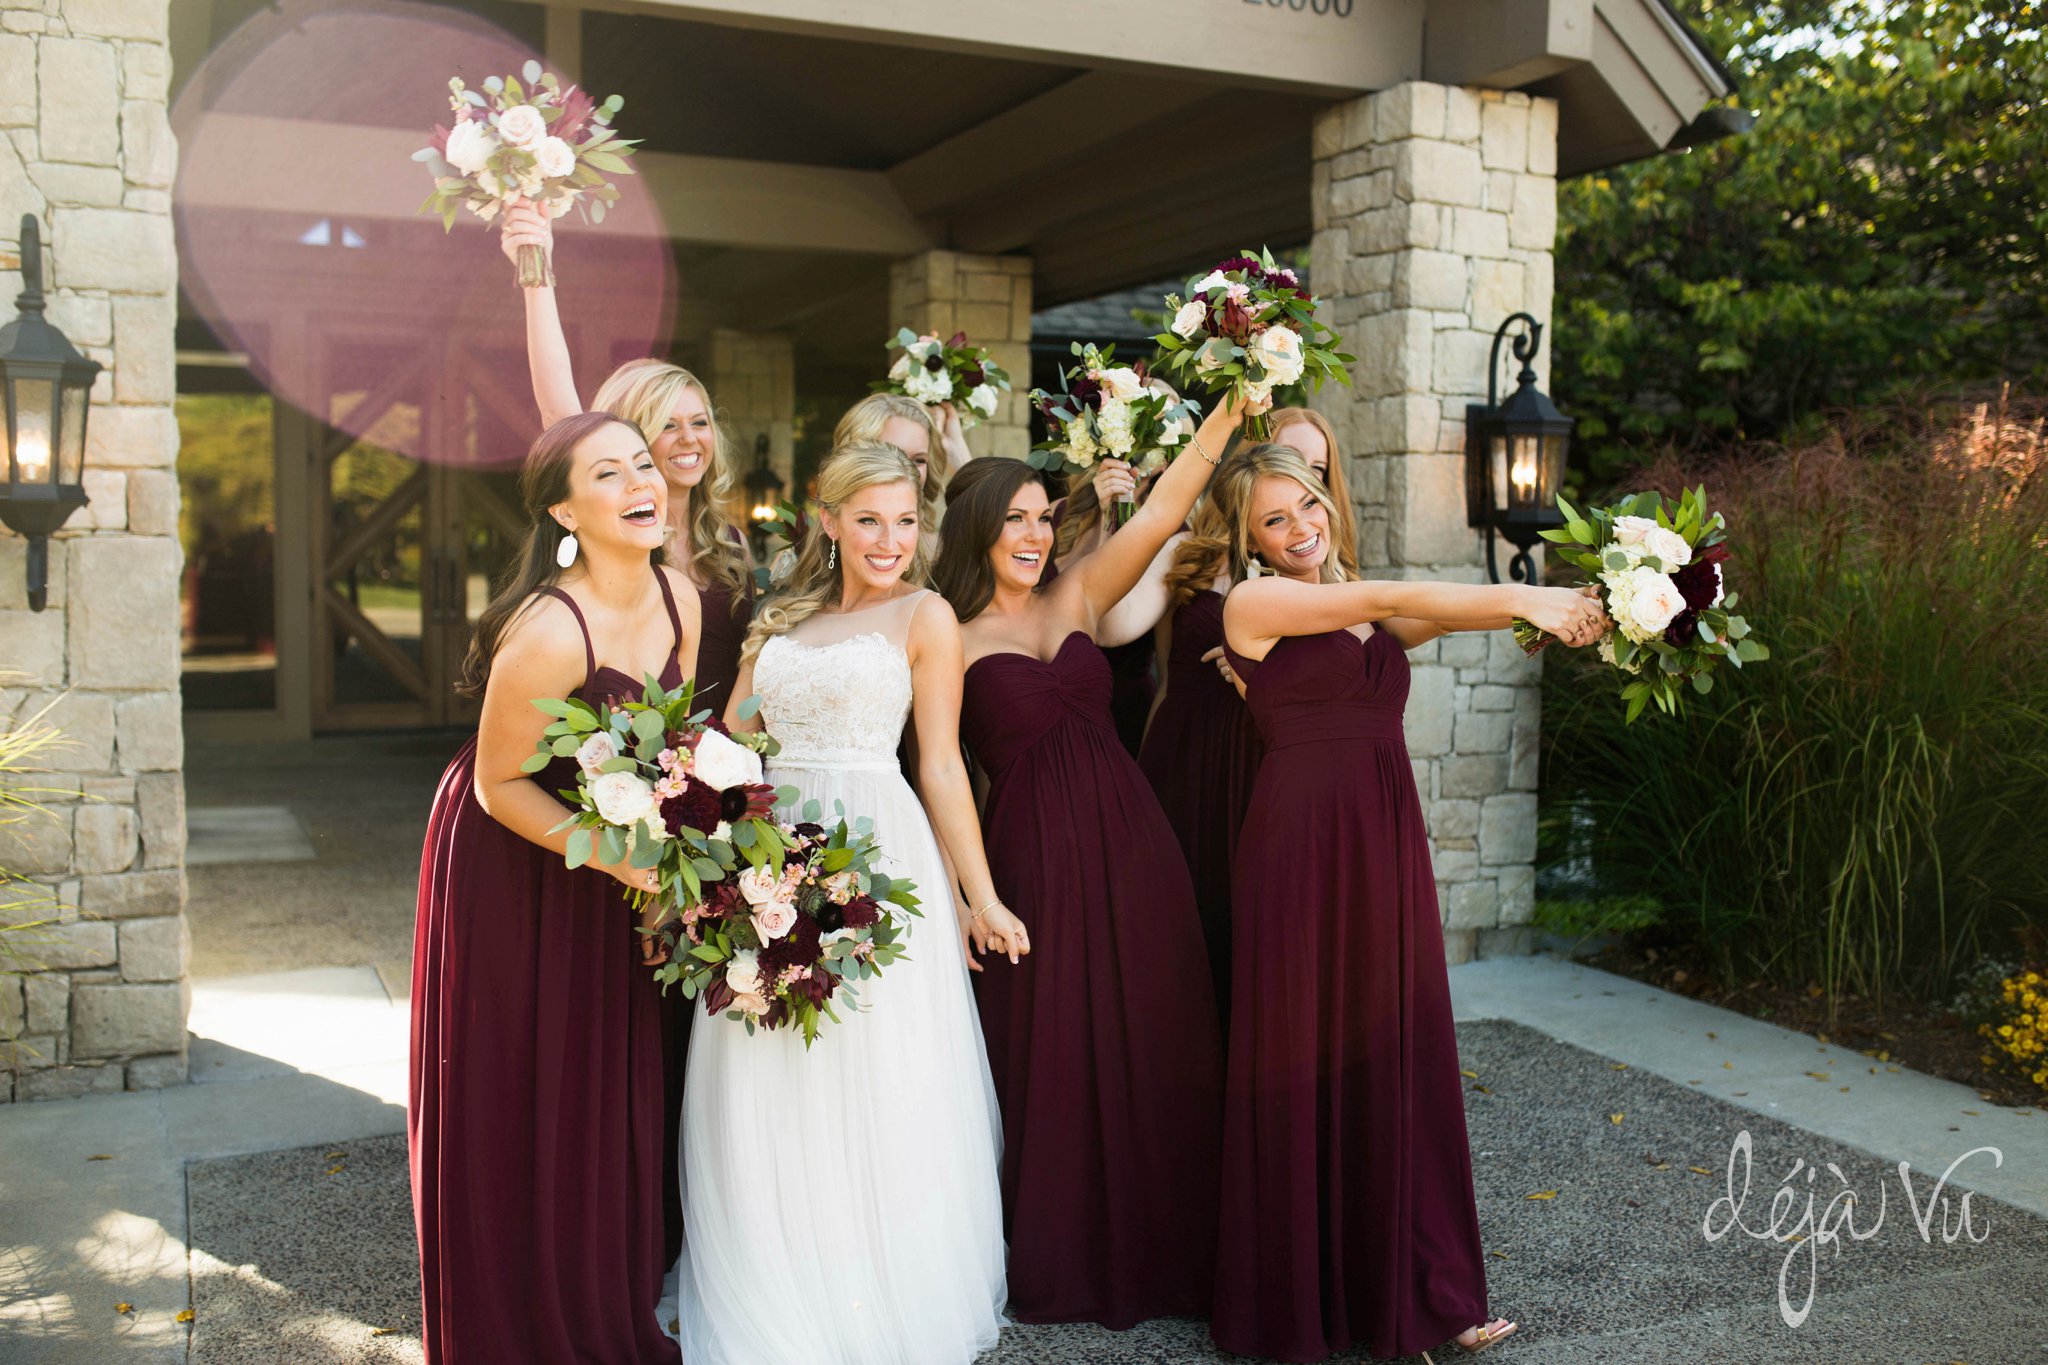 Shadow Glen Country Club Wedding | bridesmaids excited | Images by: www.feliciathephotographer.com